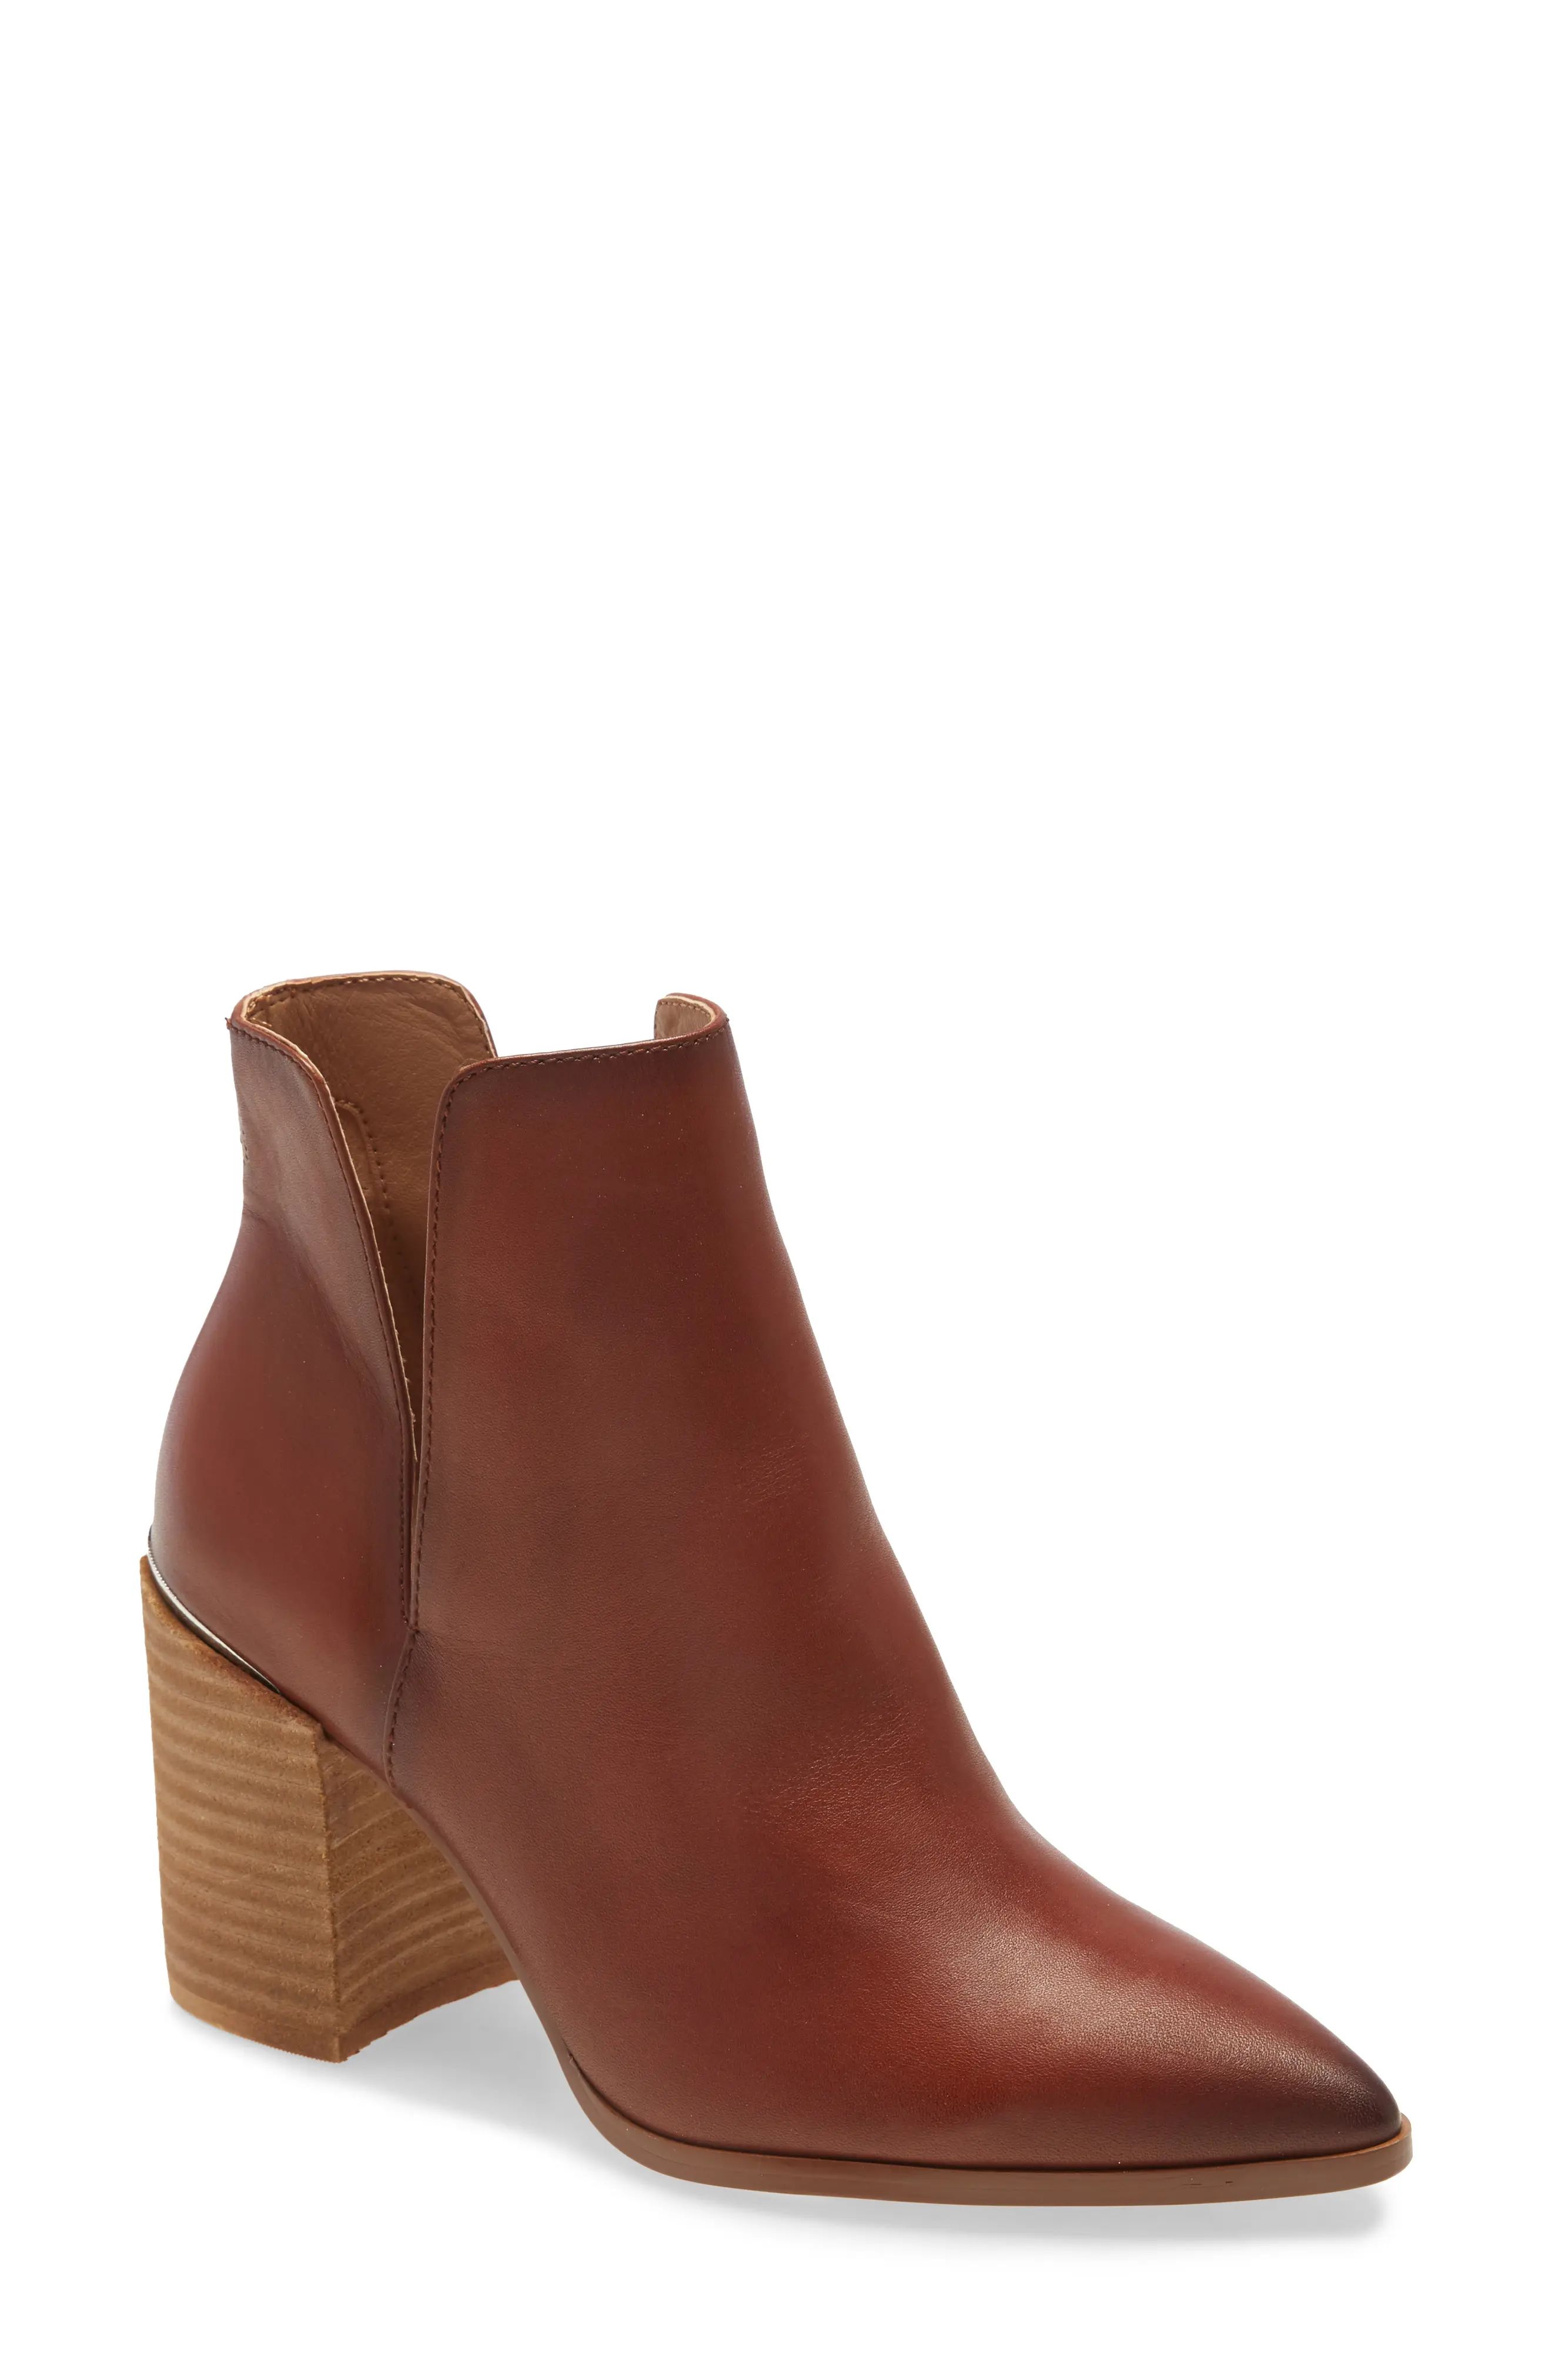 Women's Steve Madden Kaylah Pointed Toe Bootie, Size 7 M - Brown | Nordstrom